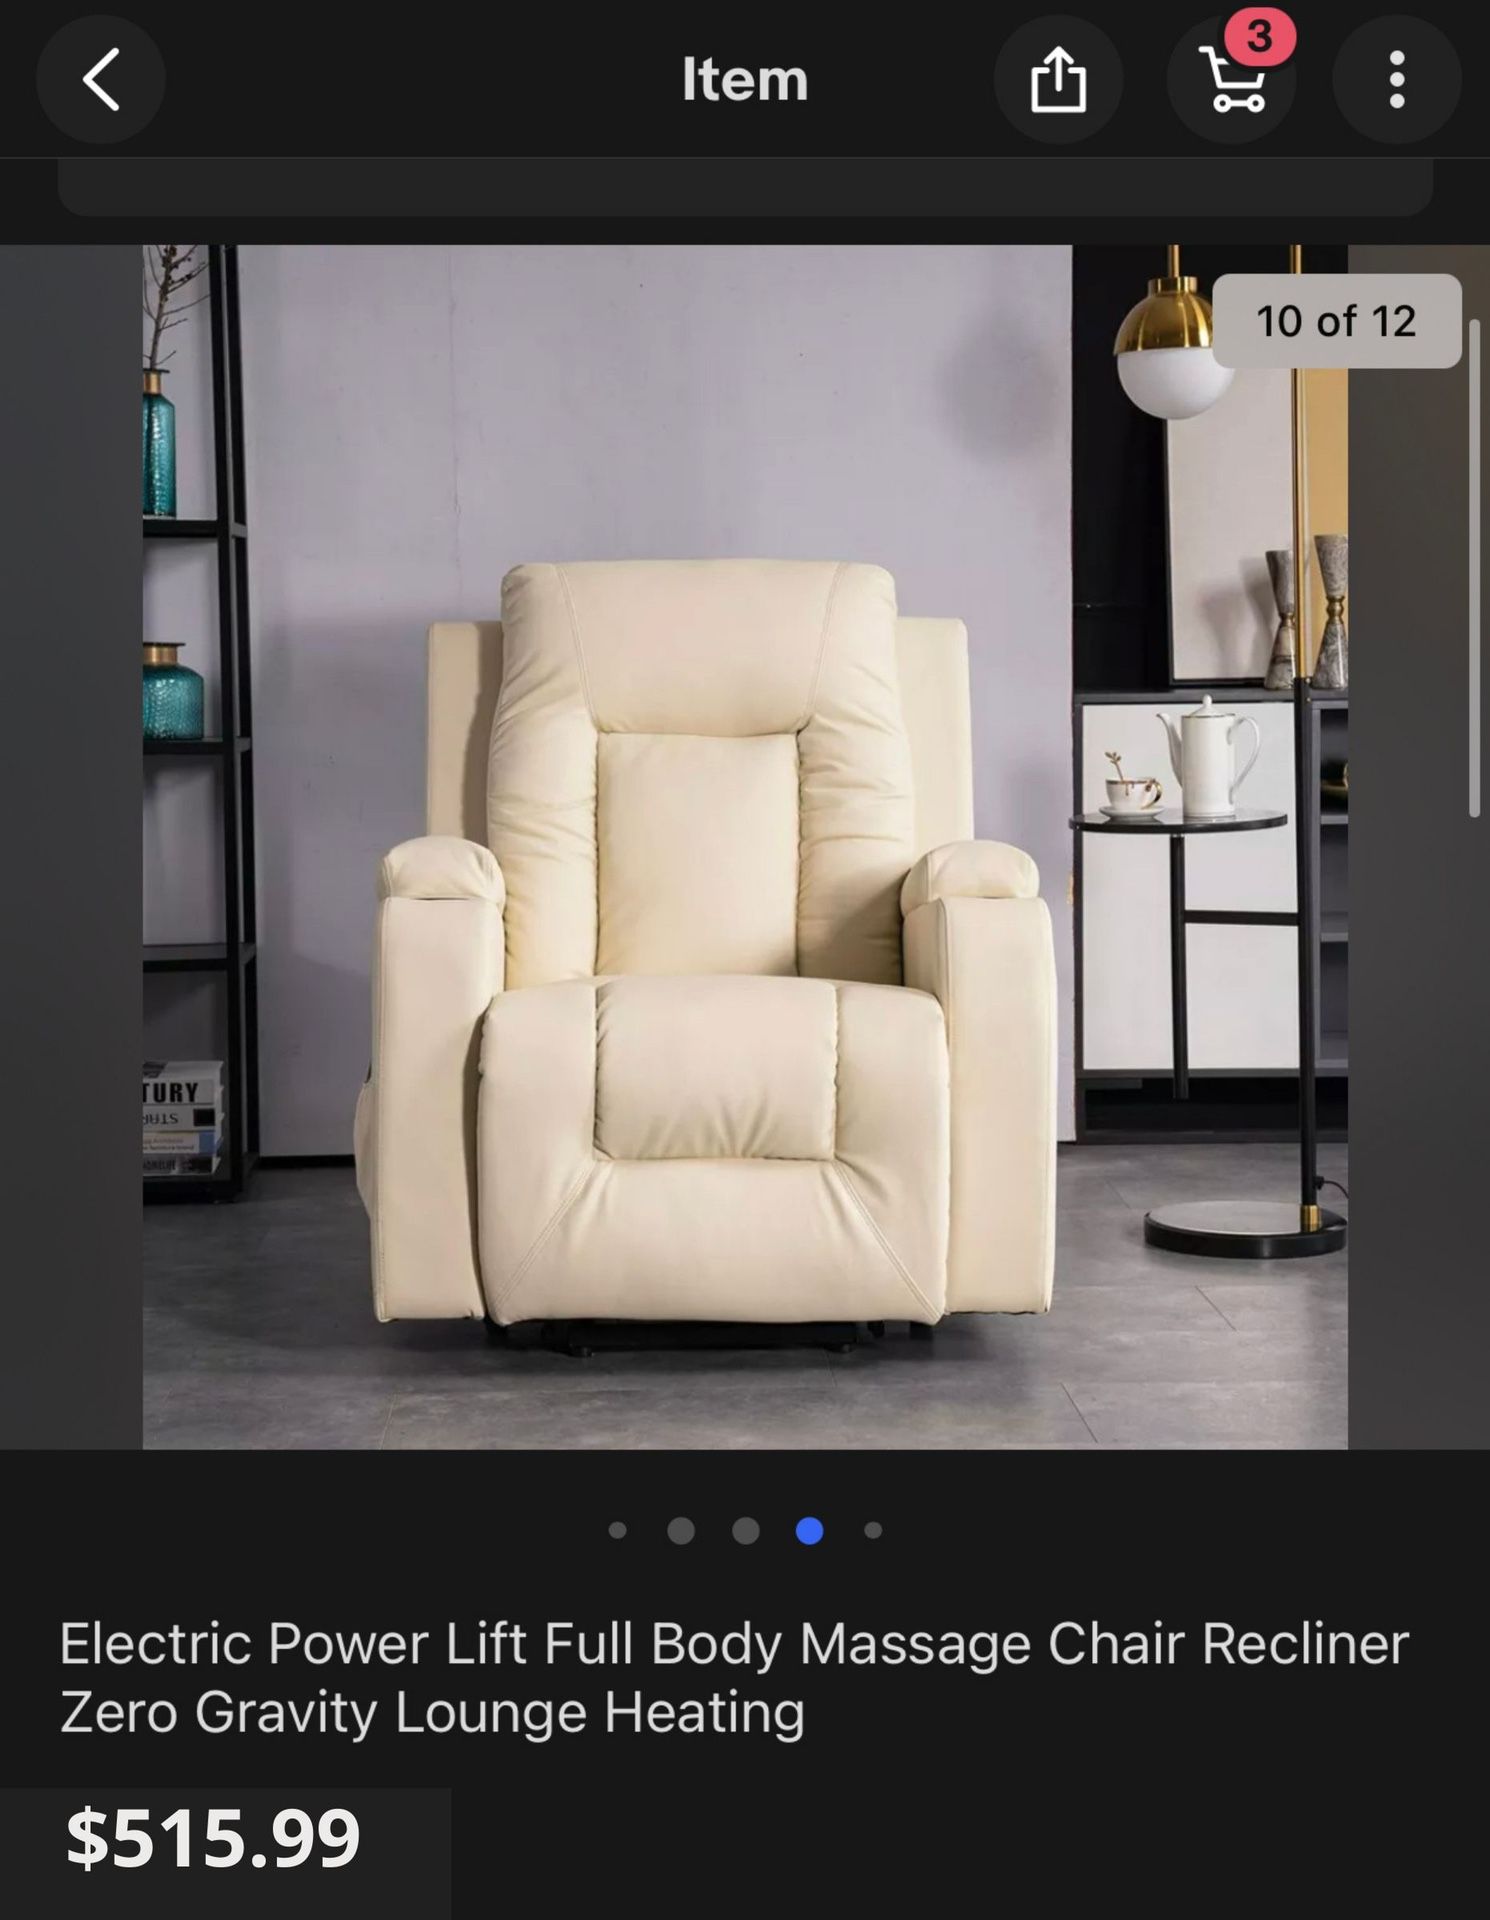 * FREE DELIVERY* NEW Massaging Lift Recliner Chair with 3 Year Squaretrade Warranty